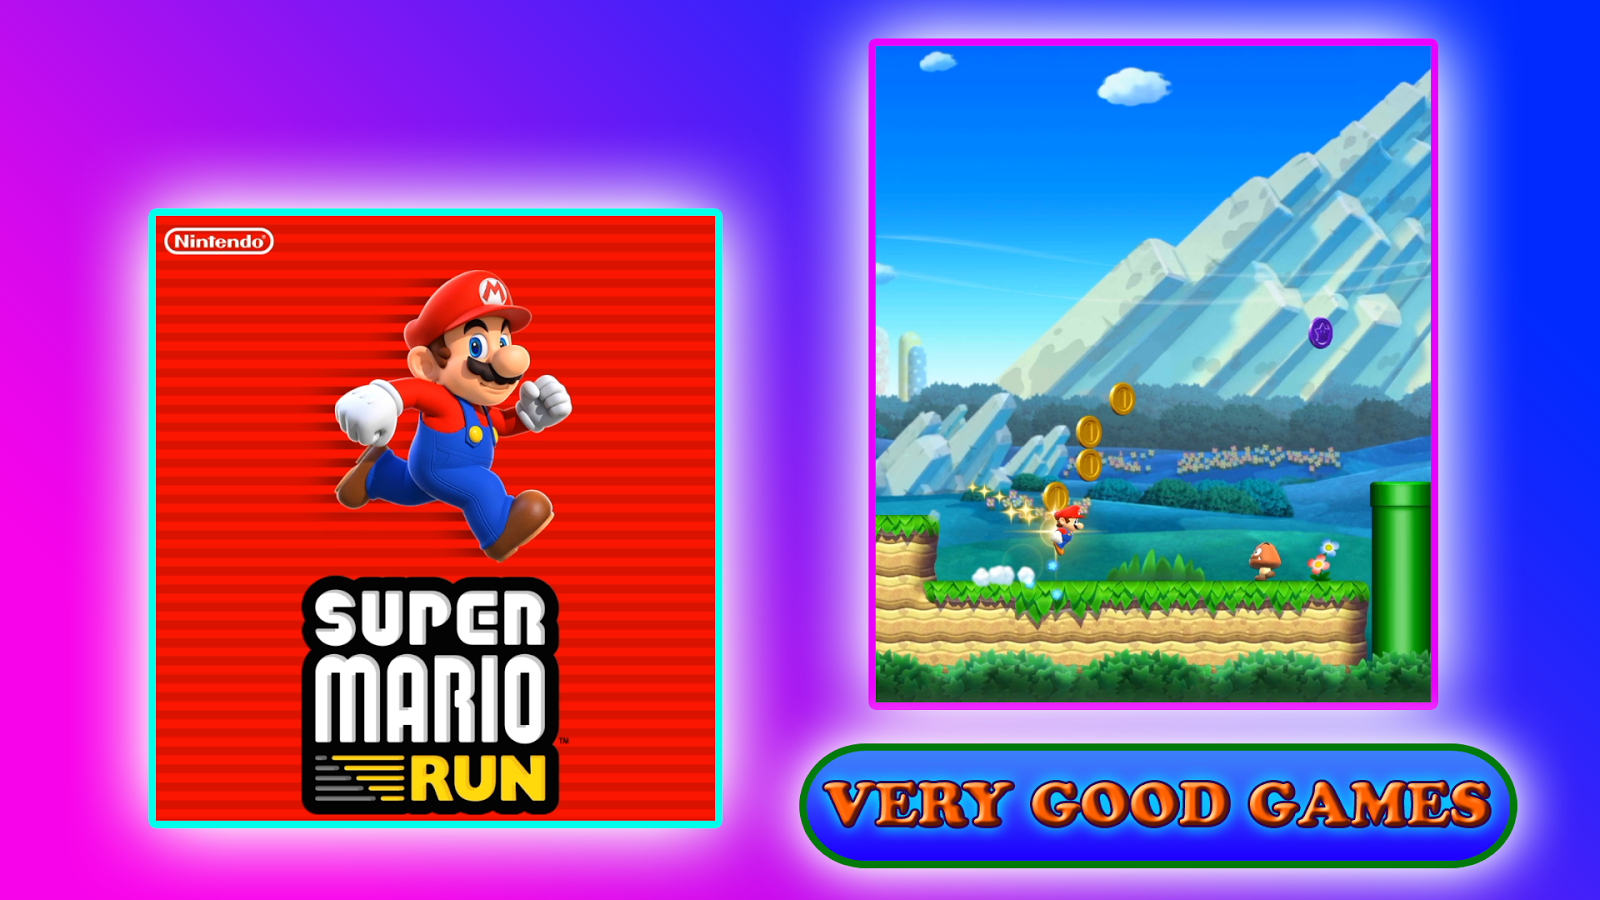 Super Mario Run - a Nintendo game for Android smartphones and tablets, for iPhone and iPad